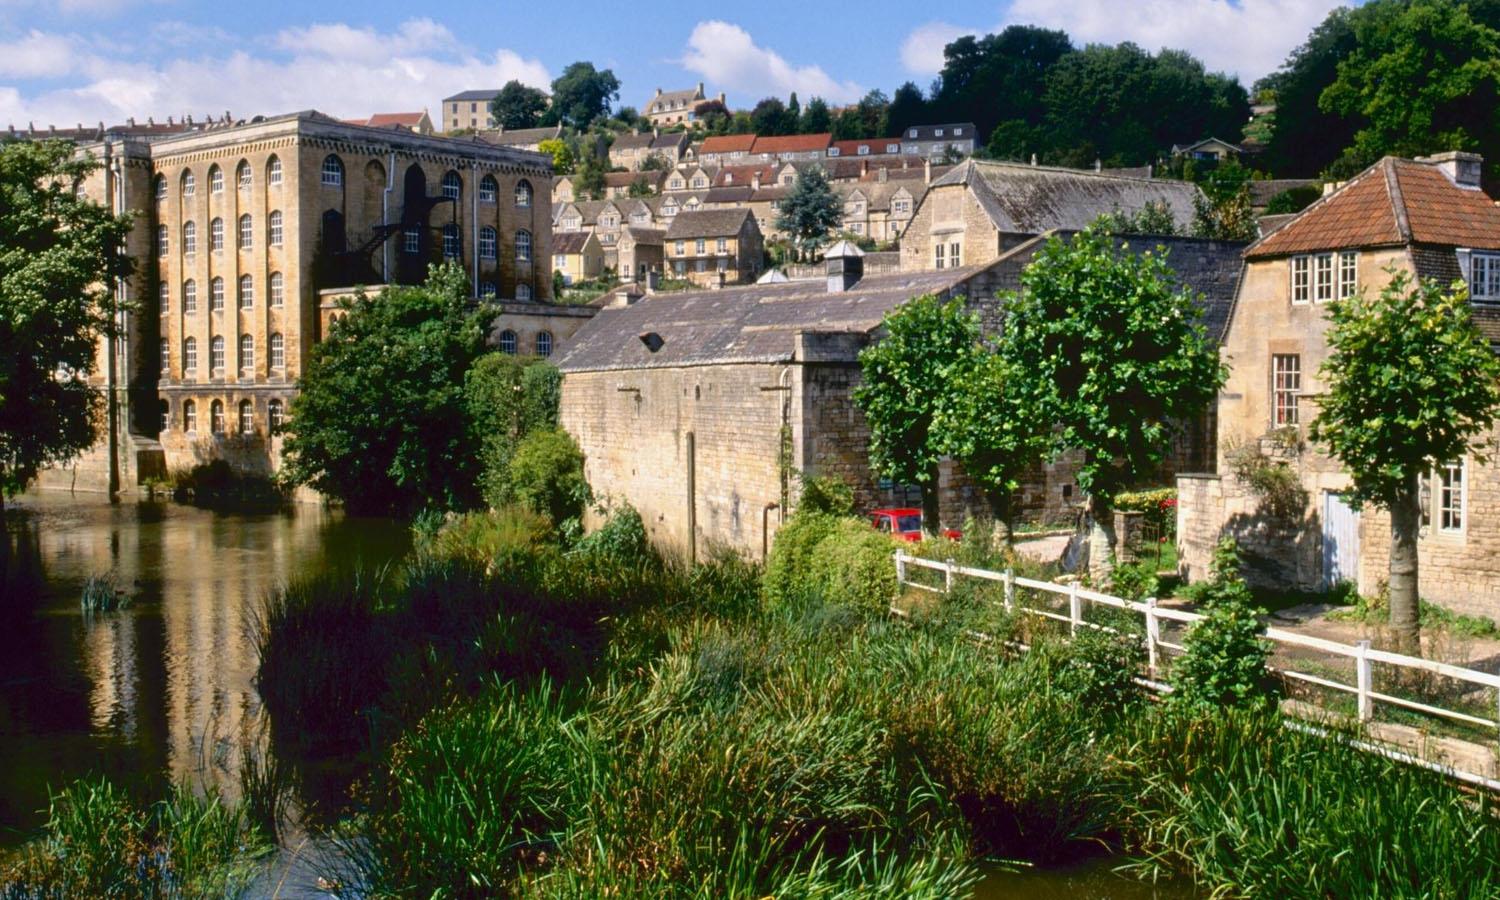 Bradford on Avon and the river